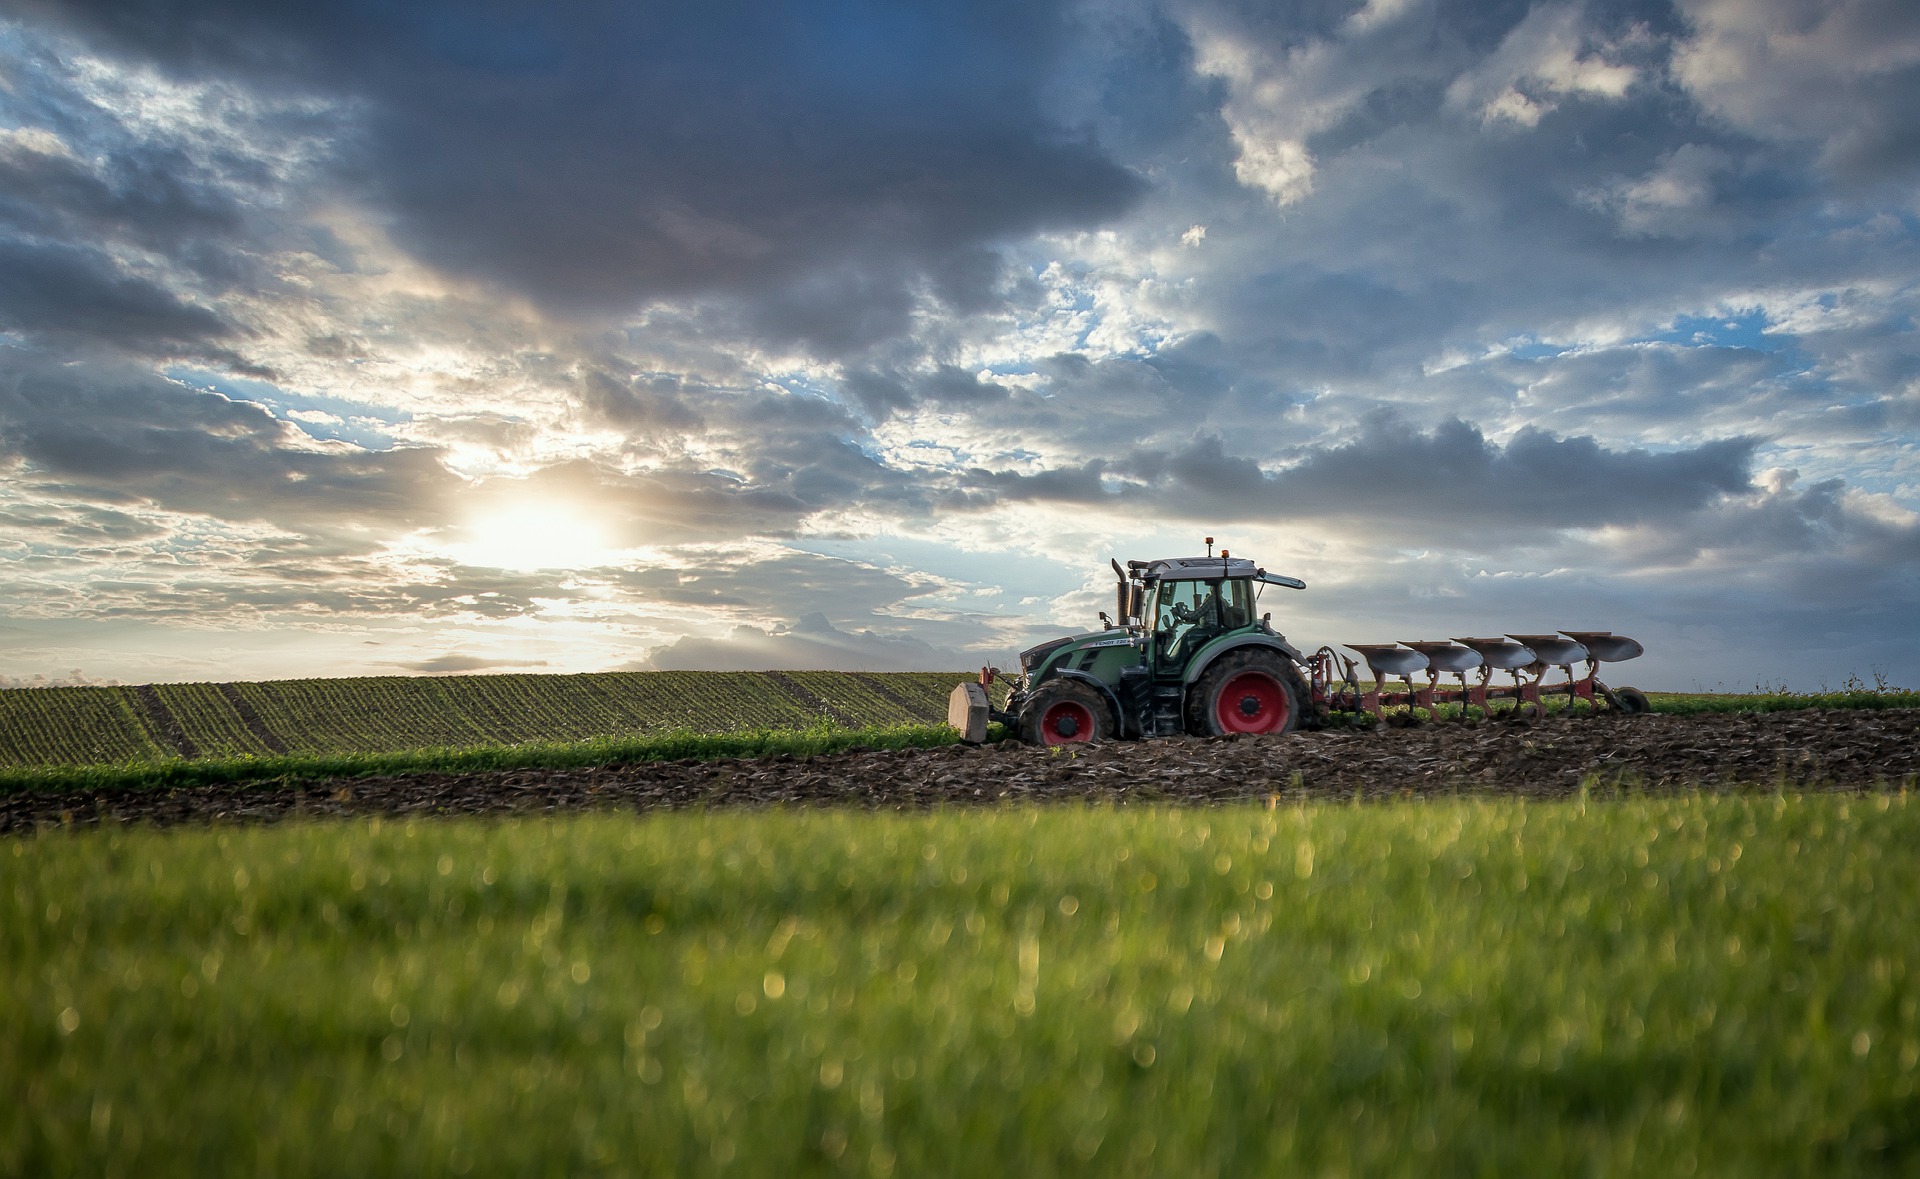 Tractor ploughing in an agricultural field